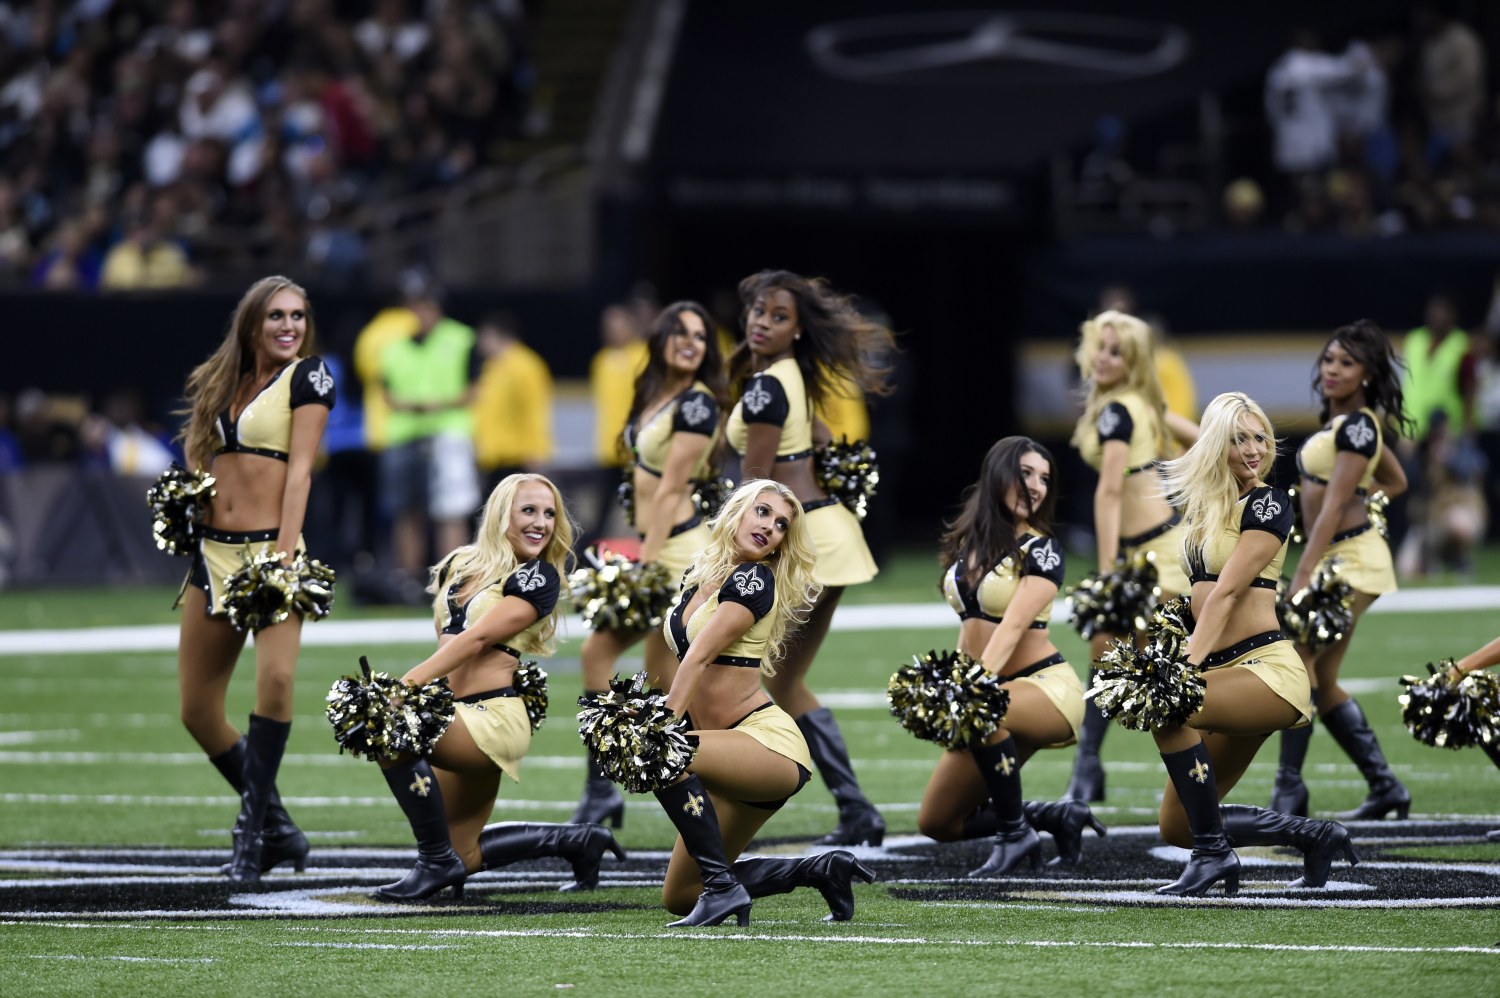 Football fans can no longer ignore the NFL's despicable treatment of its  cheerleaders